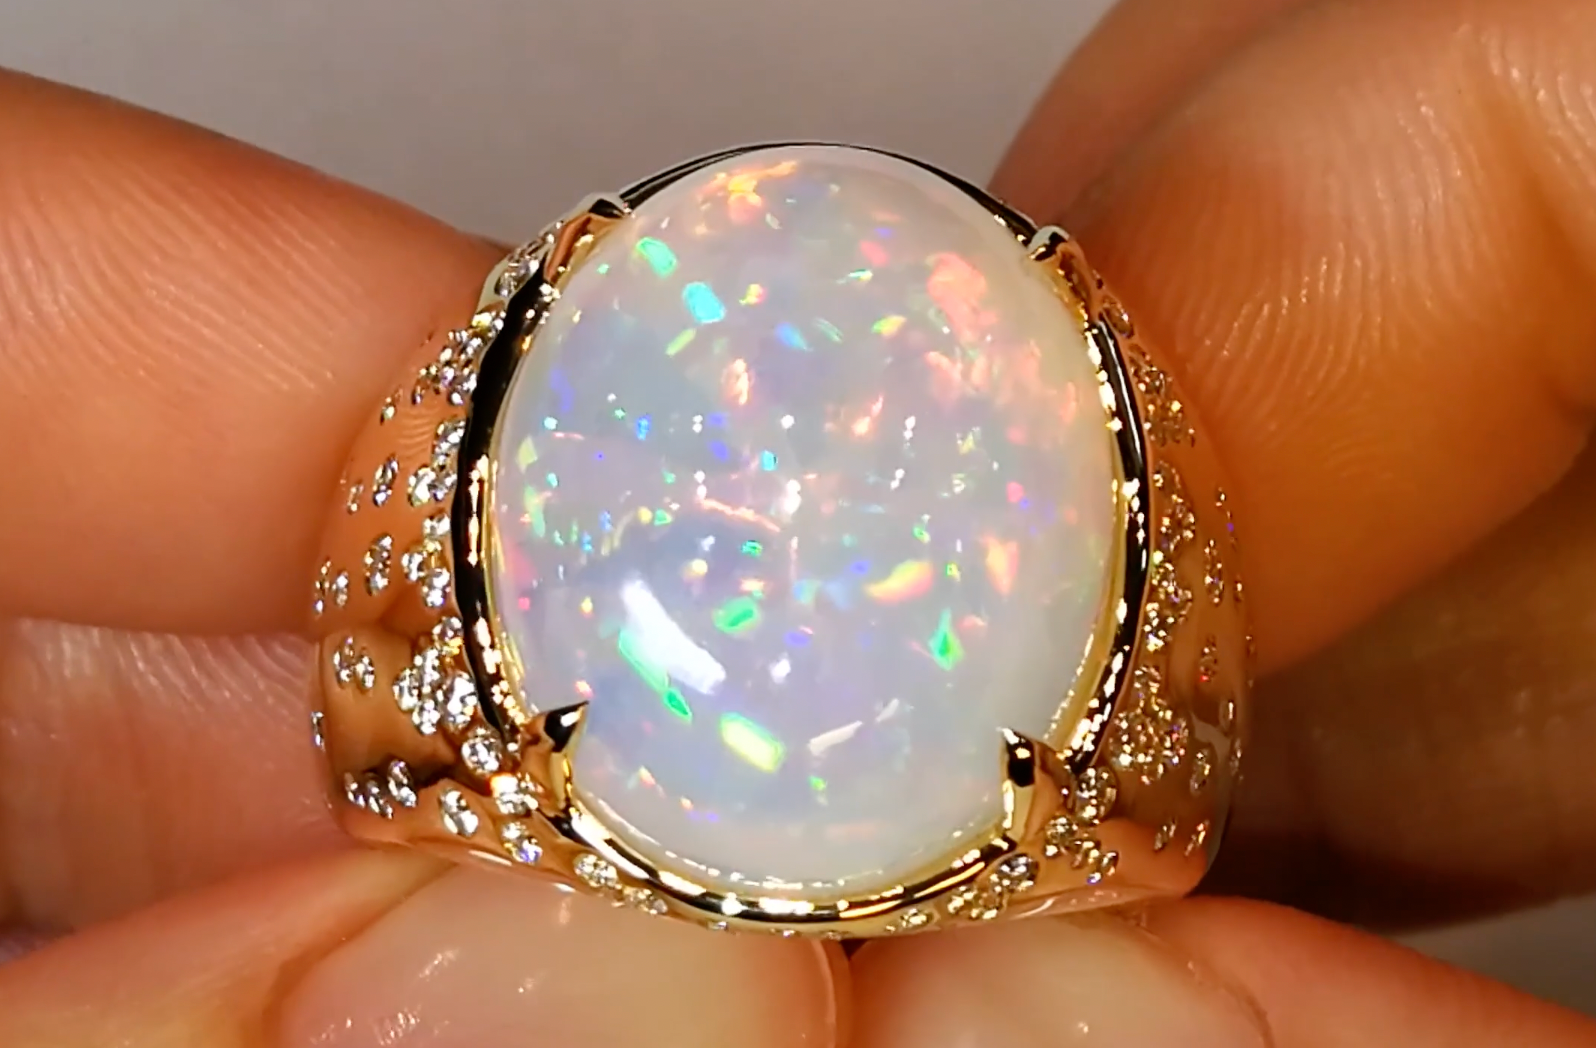 14.58ct Ethiopian Opal Ring with D Flawless Diamonds set in 18K Yellow Gold